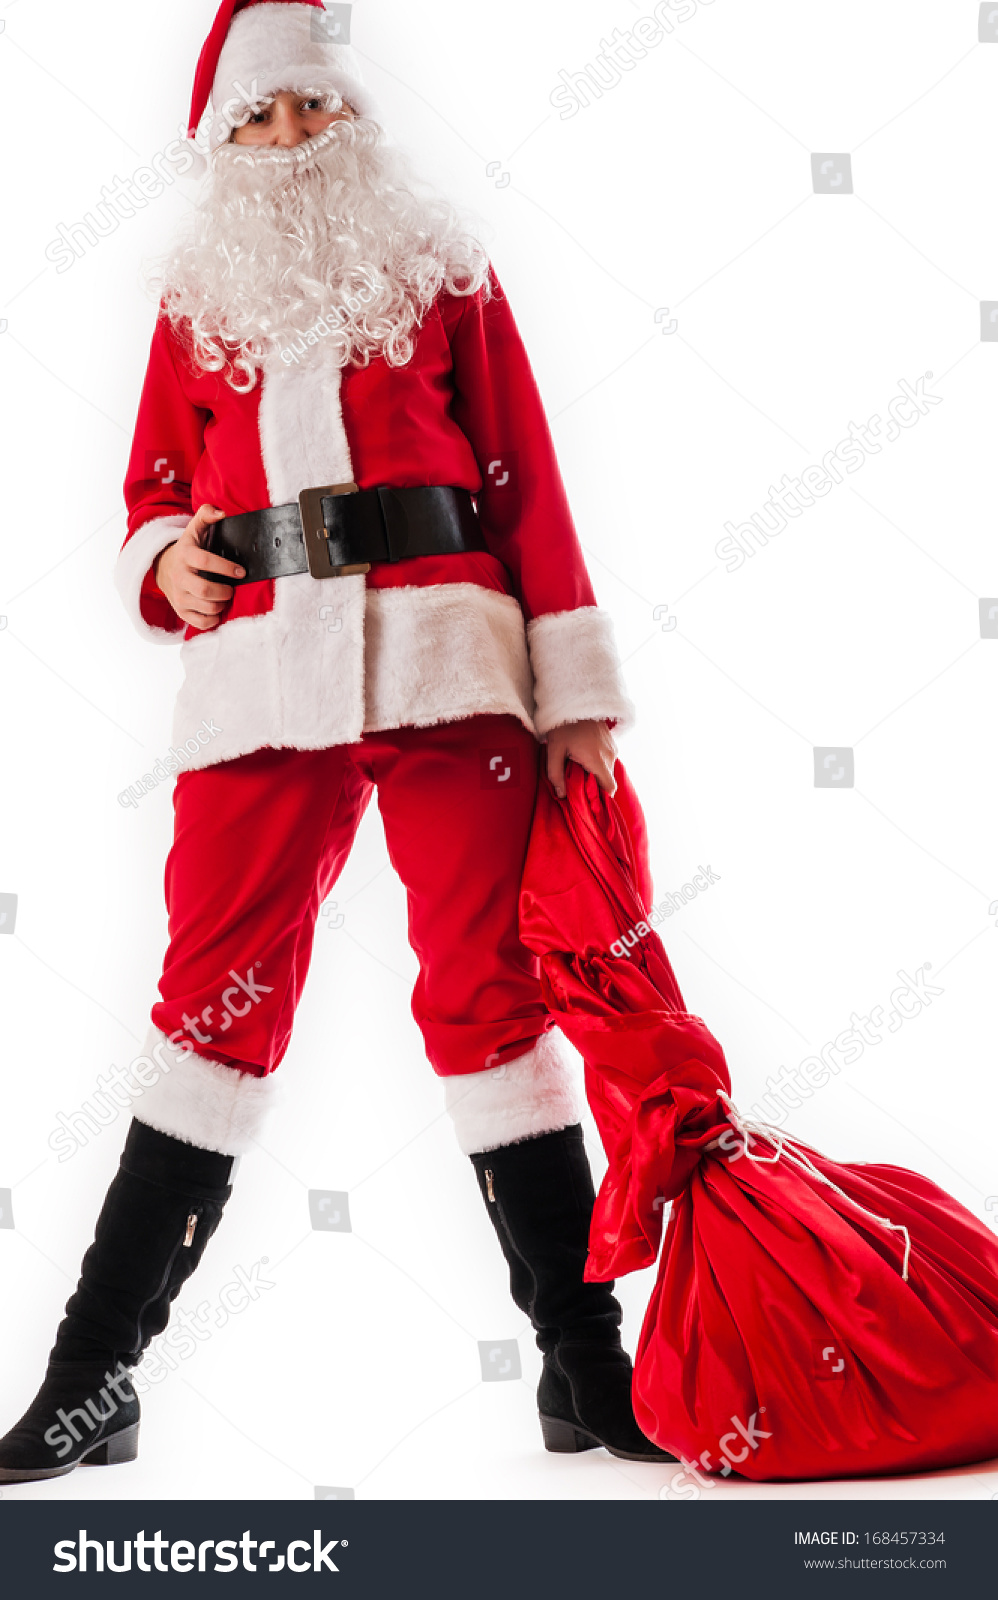 Santa Claus in a big bag of gifts #168457334